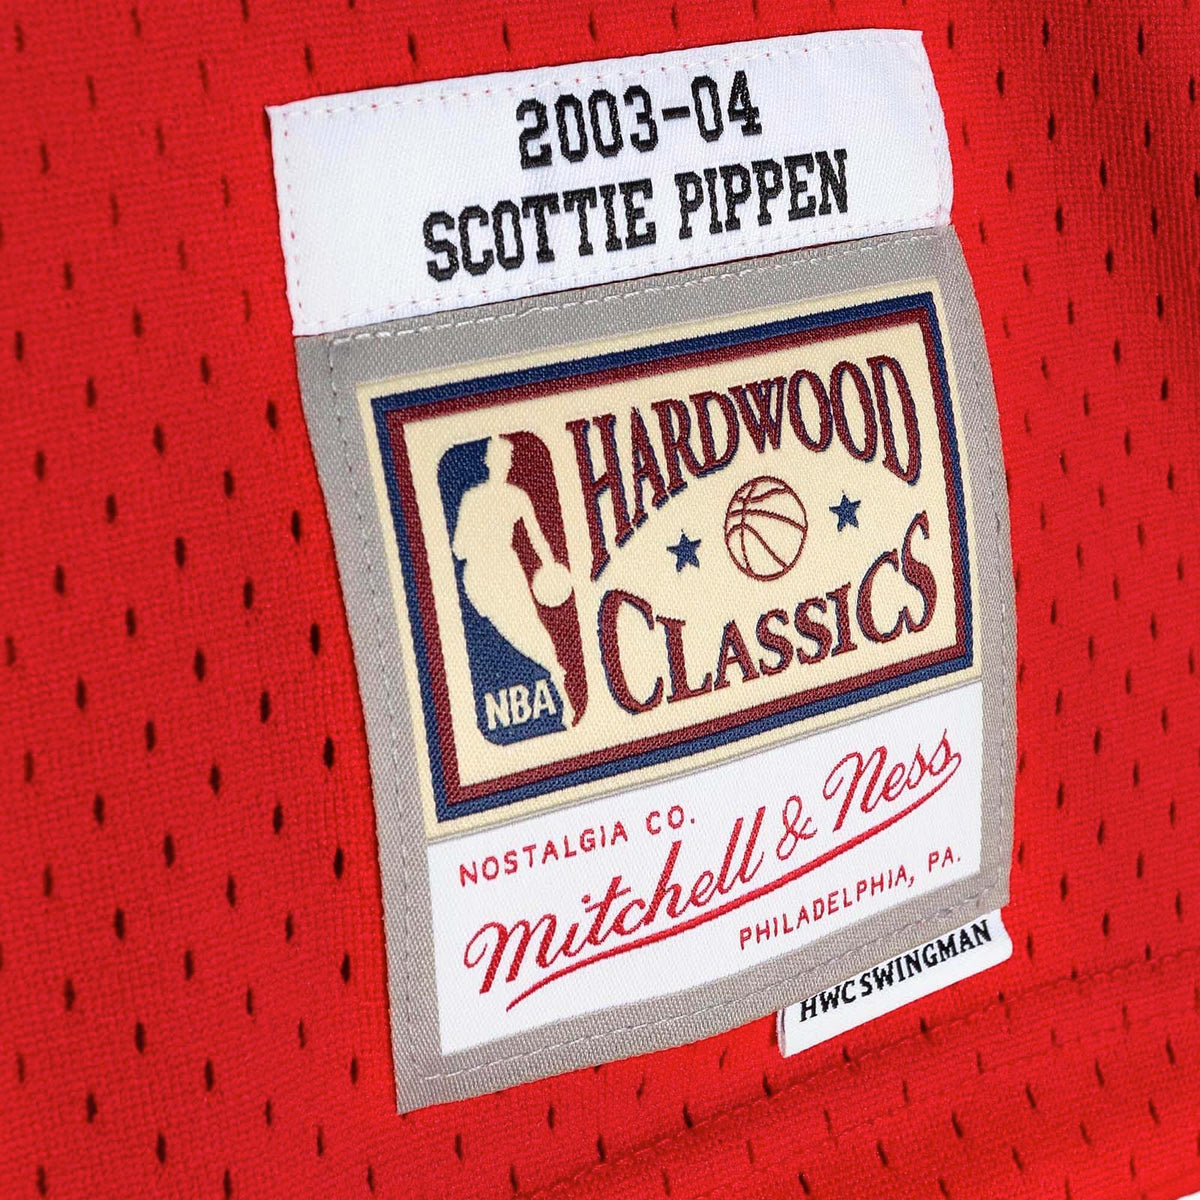  Mitchell & Ness Scottie Pippen Chicago Bulls NBA Throwback HWC  Jersey - Red : Sports & Outdoors